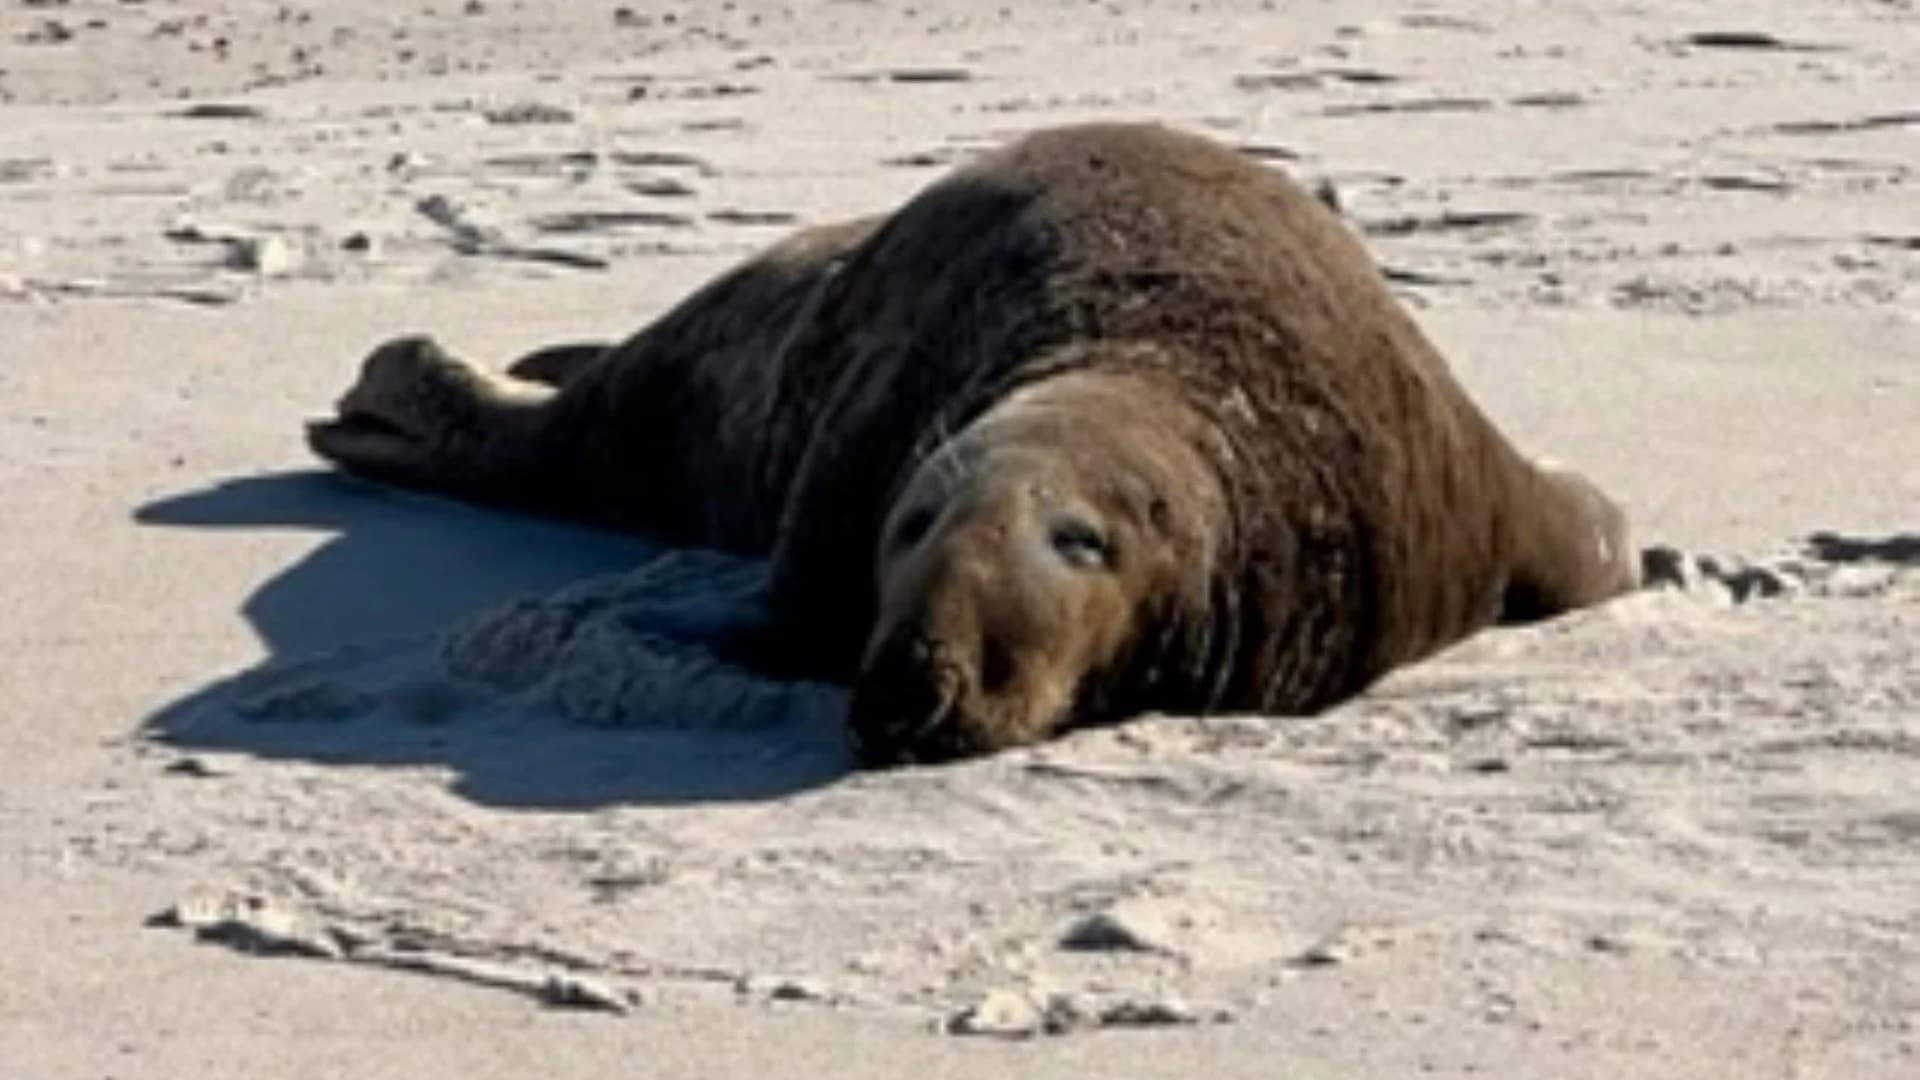 NY Marine Rescue Center to monitor grey seal on Quogue beach  